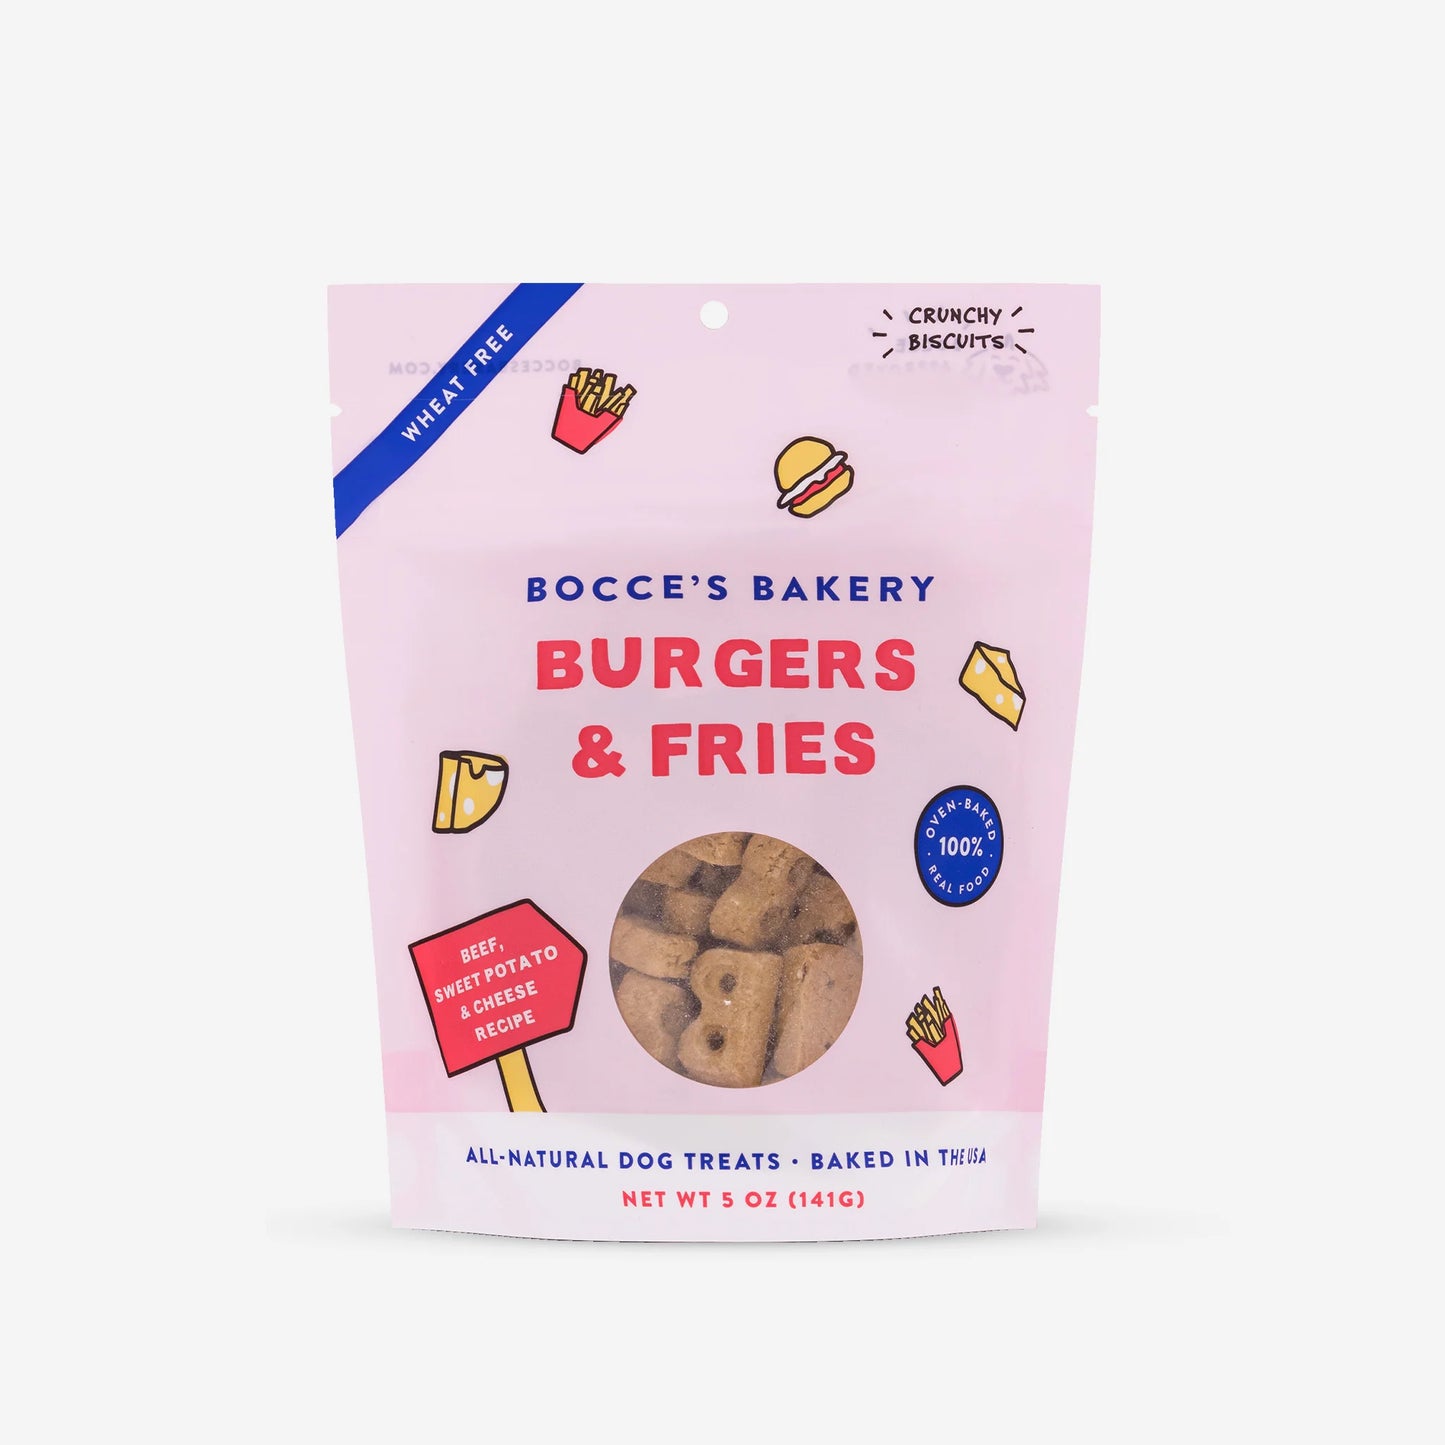 Your Whole Dog's Bocce's Bakery: Burgers & Fries Biscuits (5oz/141g) are a delicious combination of fast food perfection. Each item is lovingly baked to ensure a mouthwatering experience that will satisfy even the most discerning taste buds. Whether